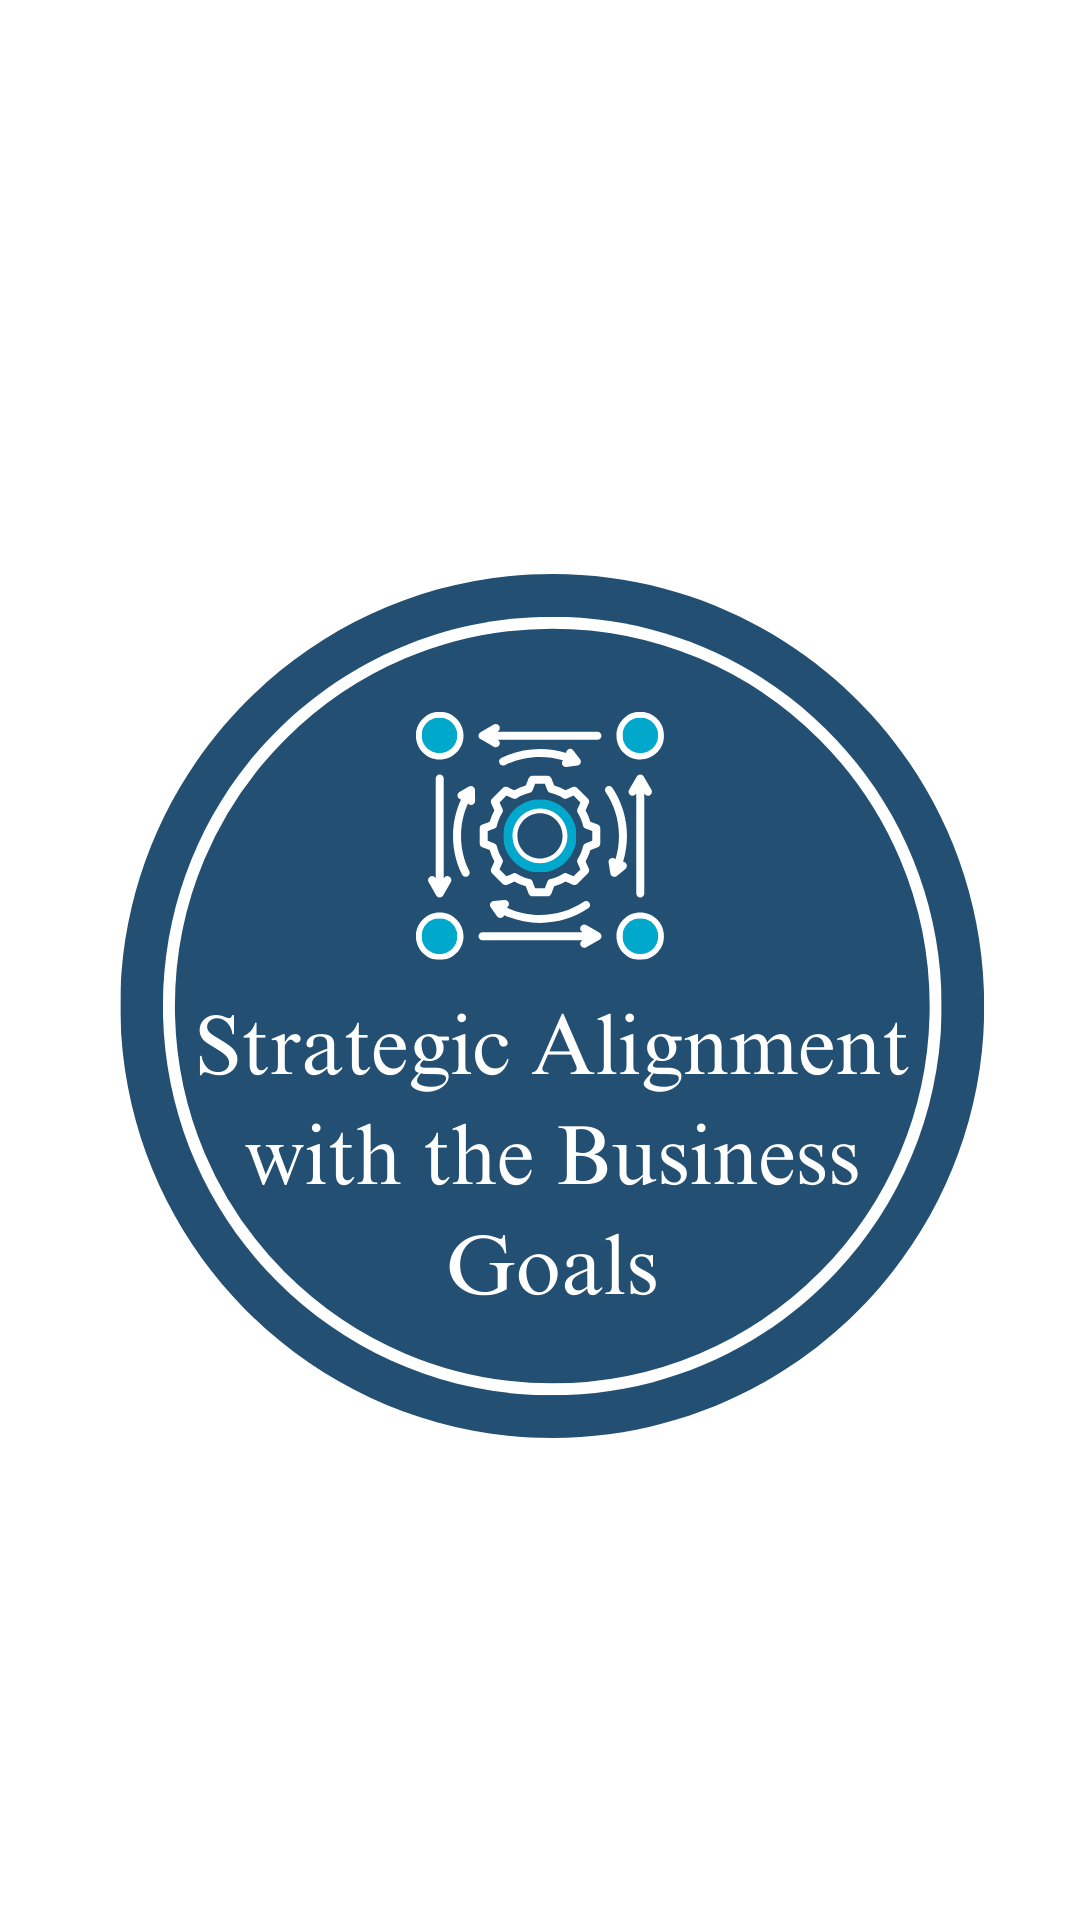 Strategic Alignment with the Business Goals